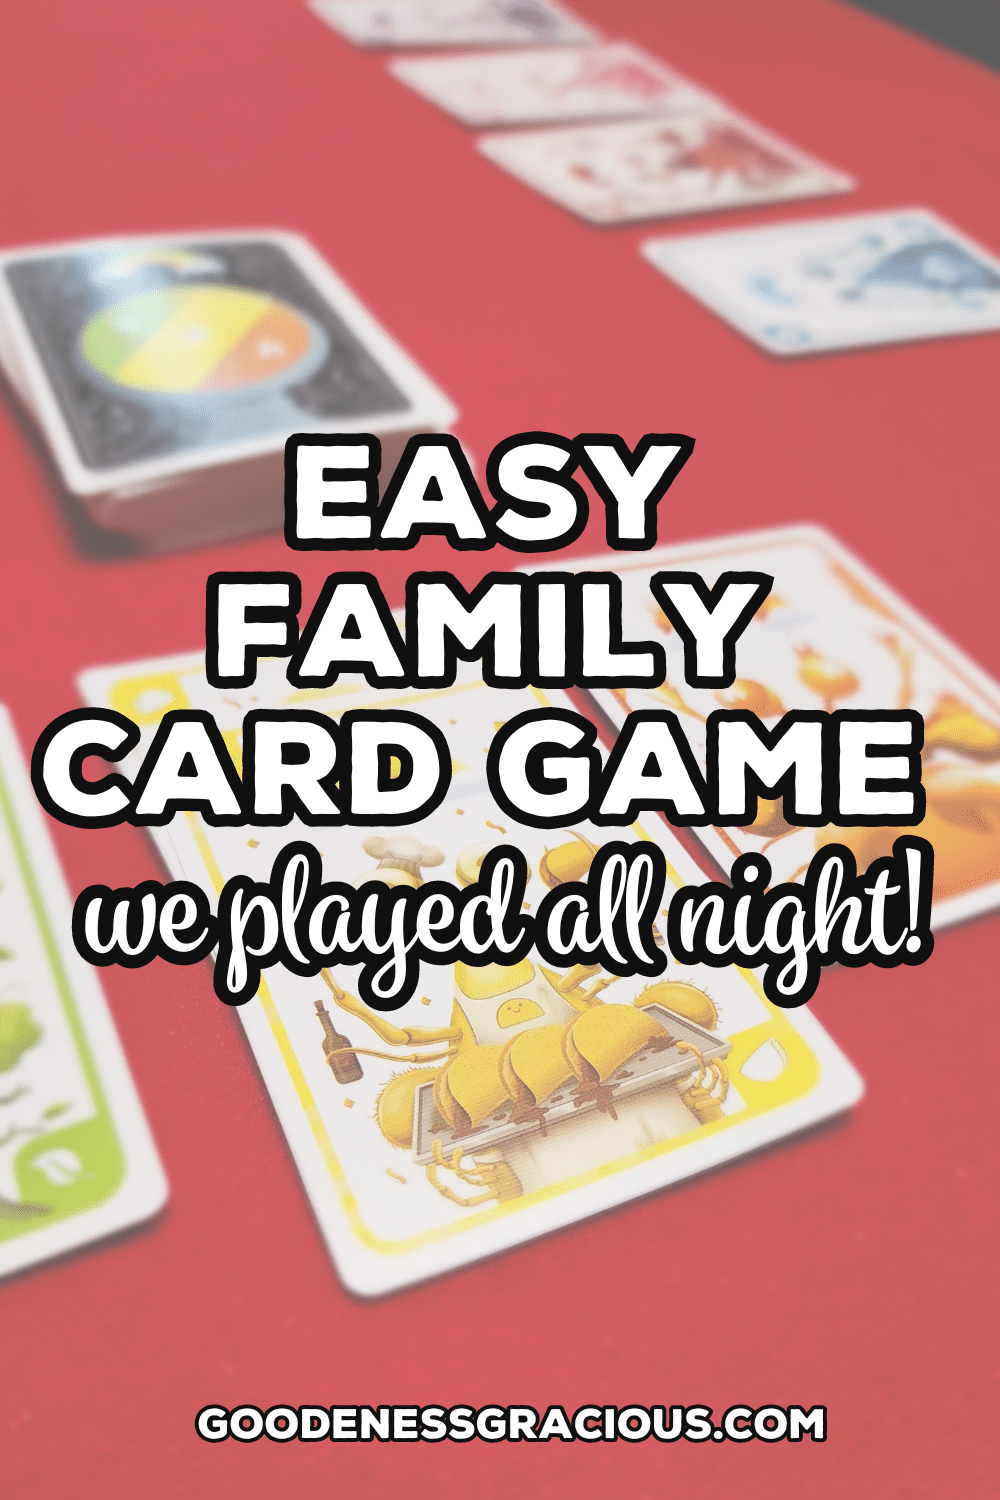 The Family Card Game That Took Us 60 Seconds to Learn and We Played ALL NIGHT! via @crisgoode